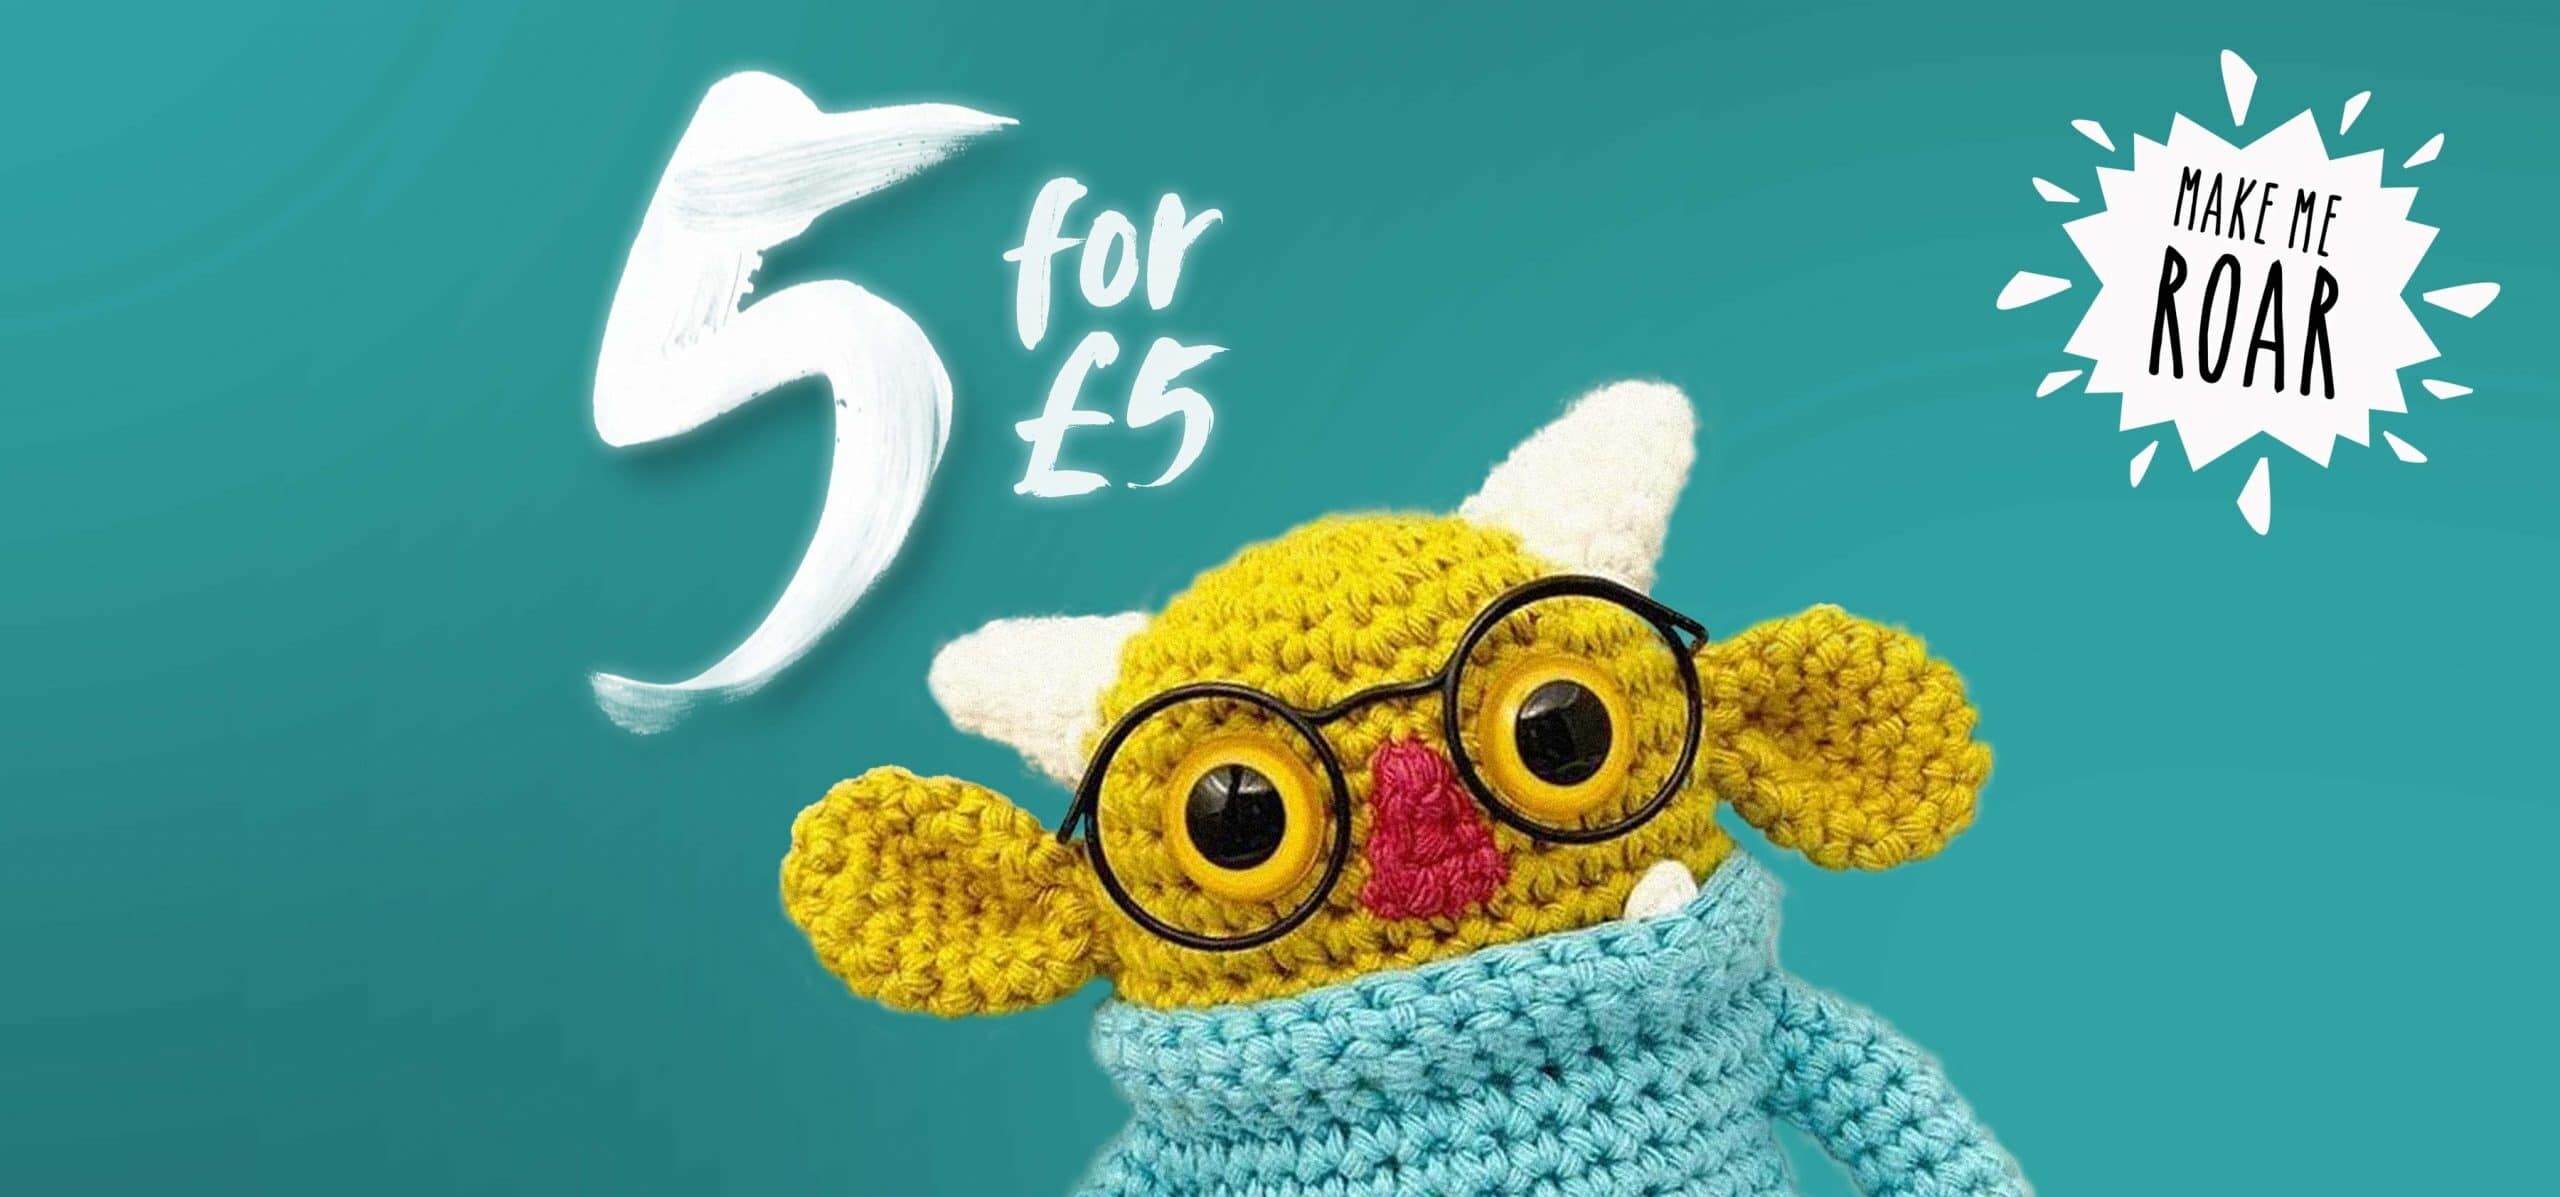 5 for a fiver, one week only